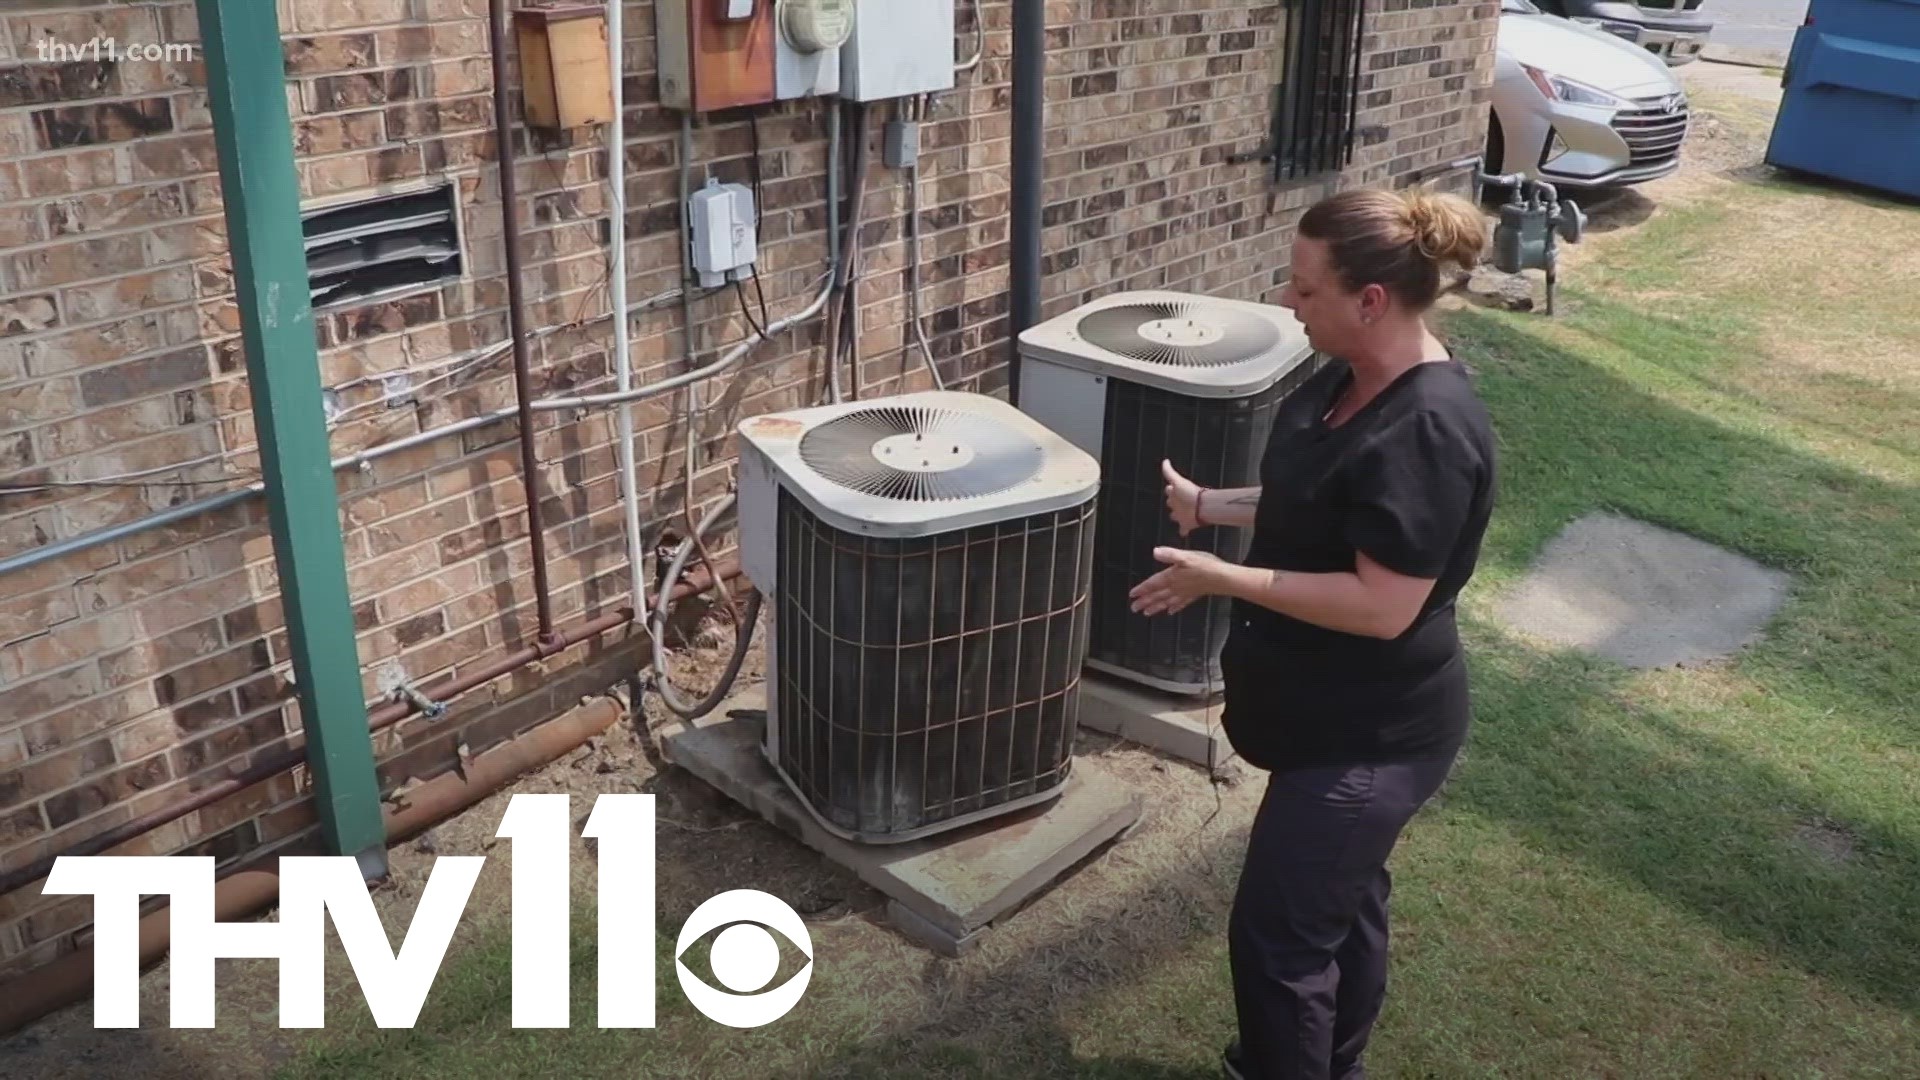 As the temperatures keep climbing, one North Little Rock veterinarian clinic has been left with an annoying and expensive problem after someone stole their a/c unit.